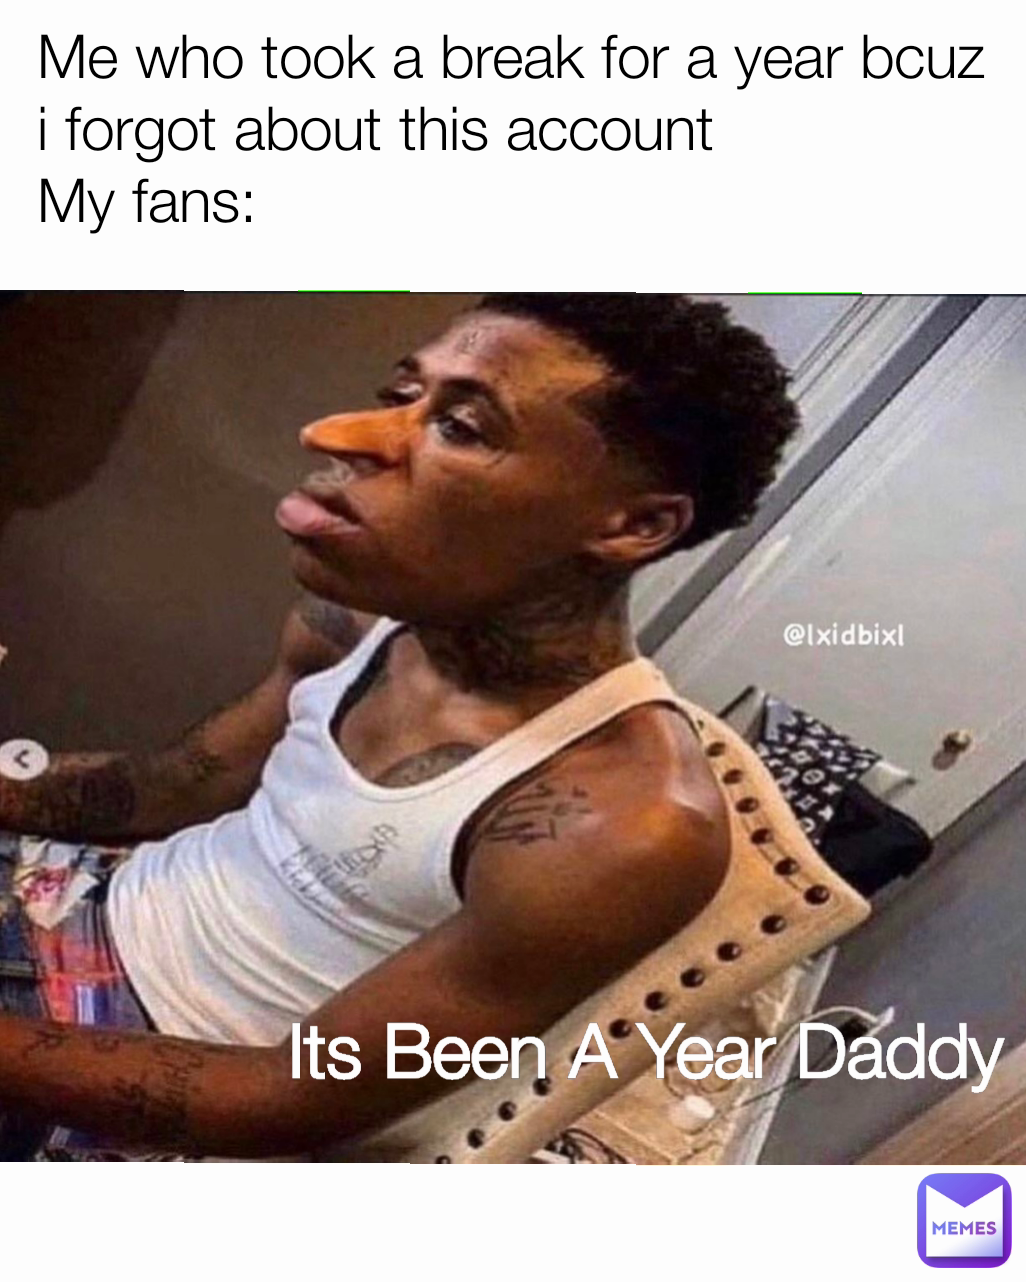 Me who took a break for a year bcuz i forgot about this account
My fans:
 Its Been A Year Daddy